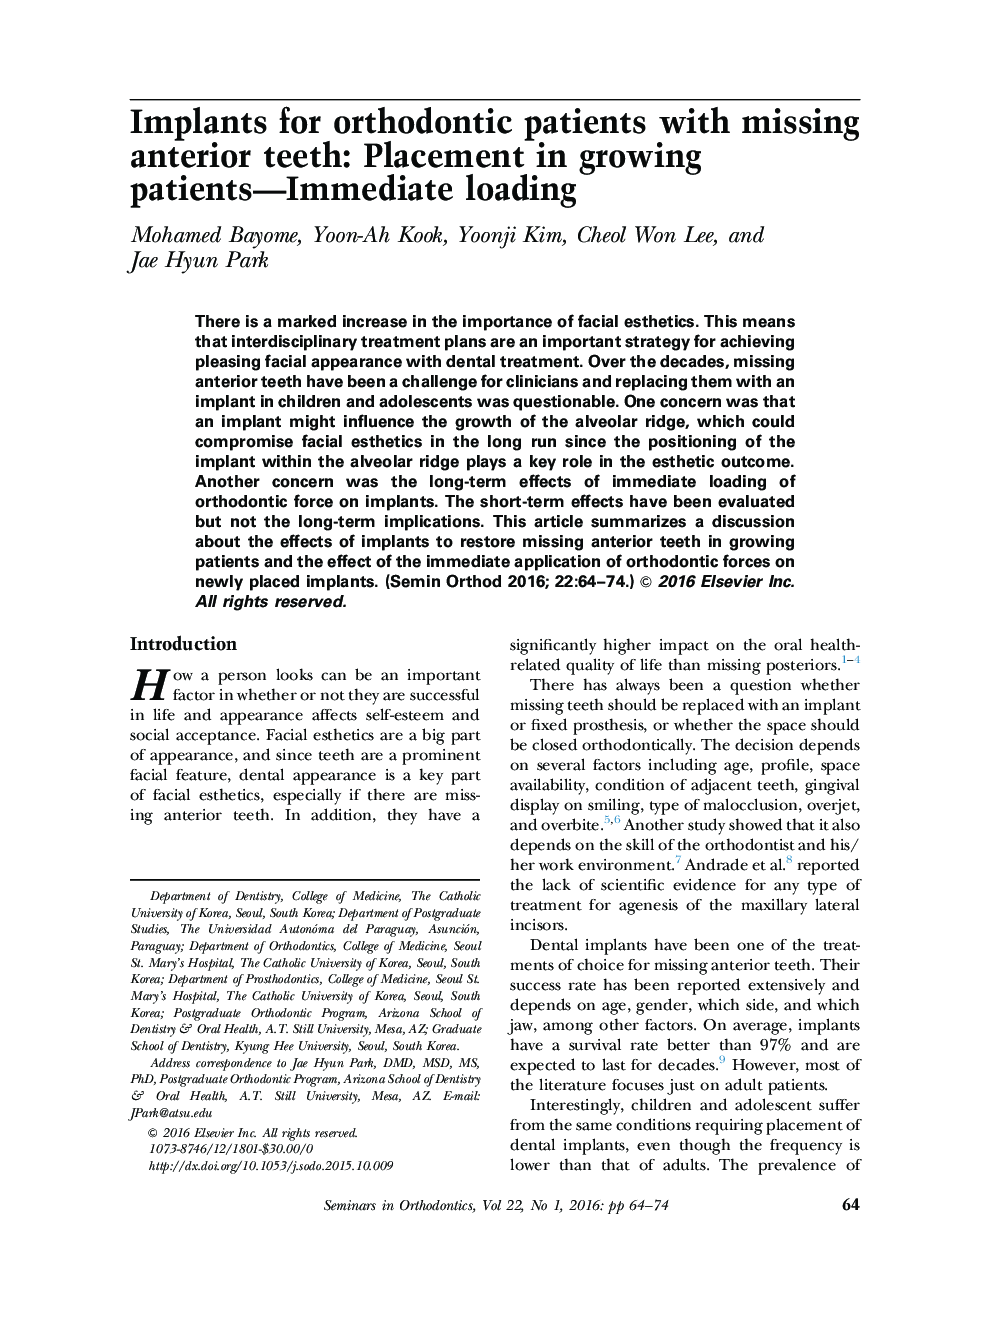 Implants for orthodontic patients with missing anterior teeth: Placement in growing patients—Immediate loading